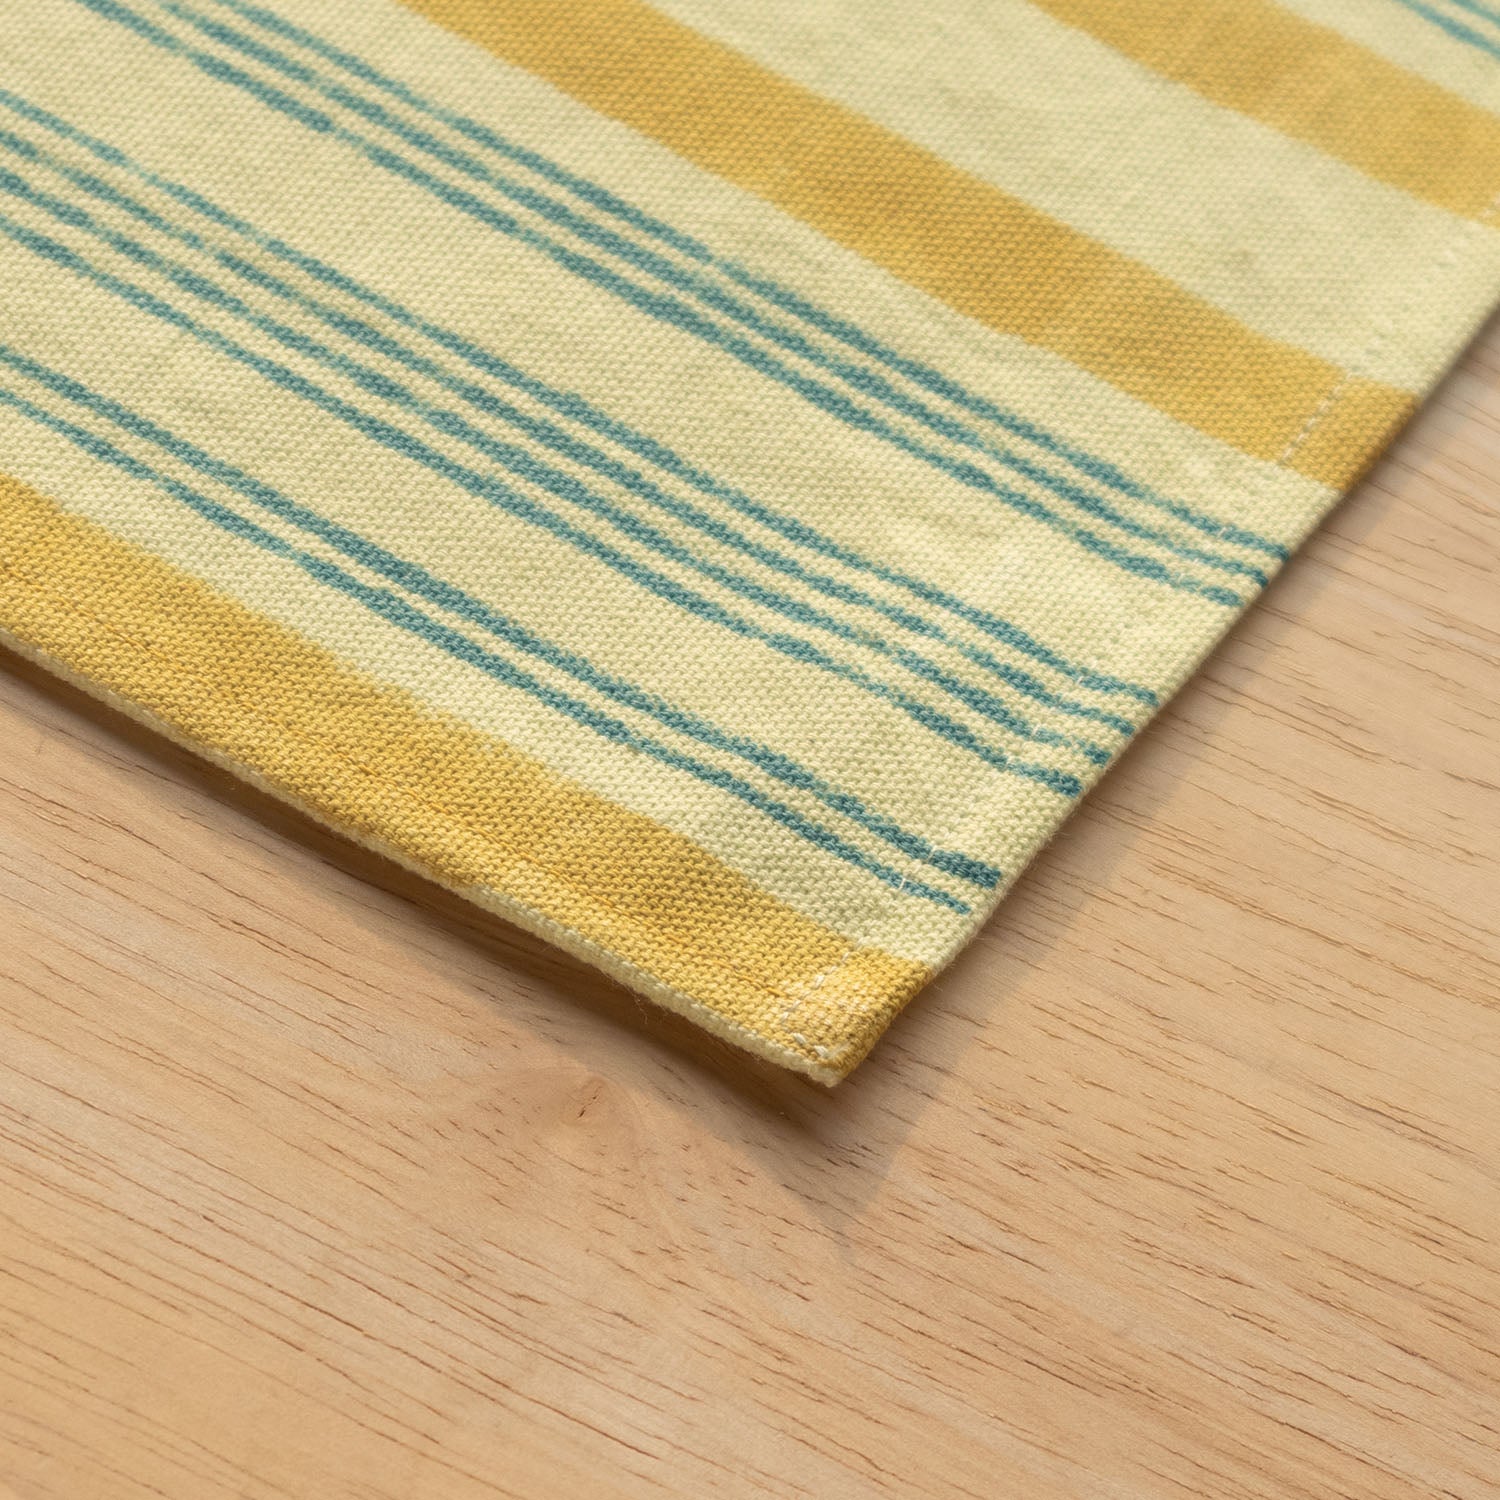 Block Printed Cotton Table Mat in Yellow & Blue Stripes - Set of 2 - 13x18